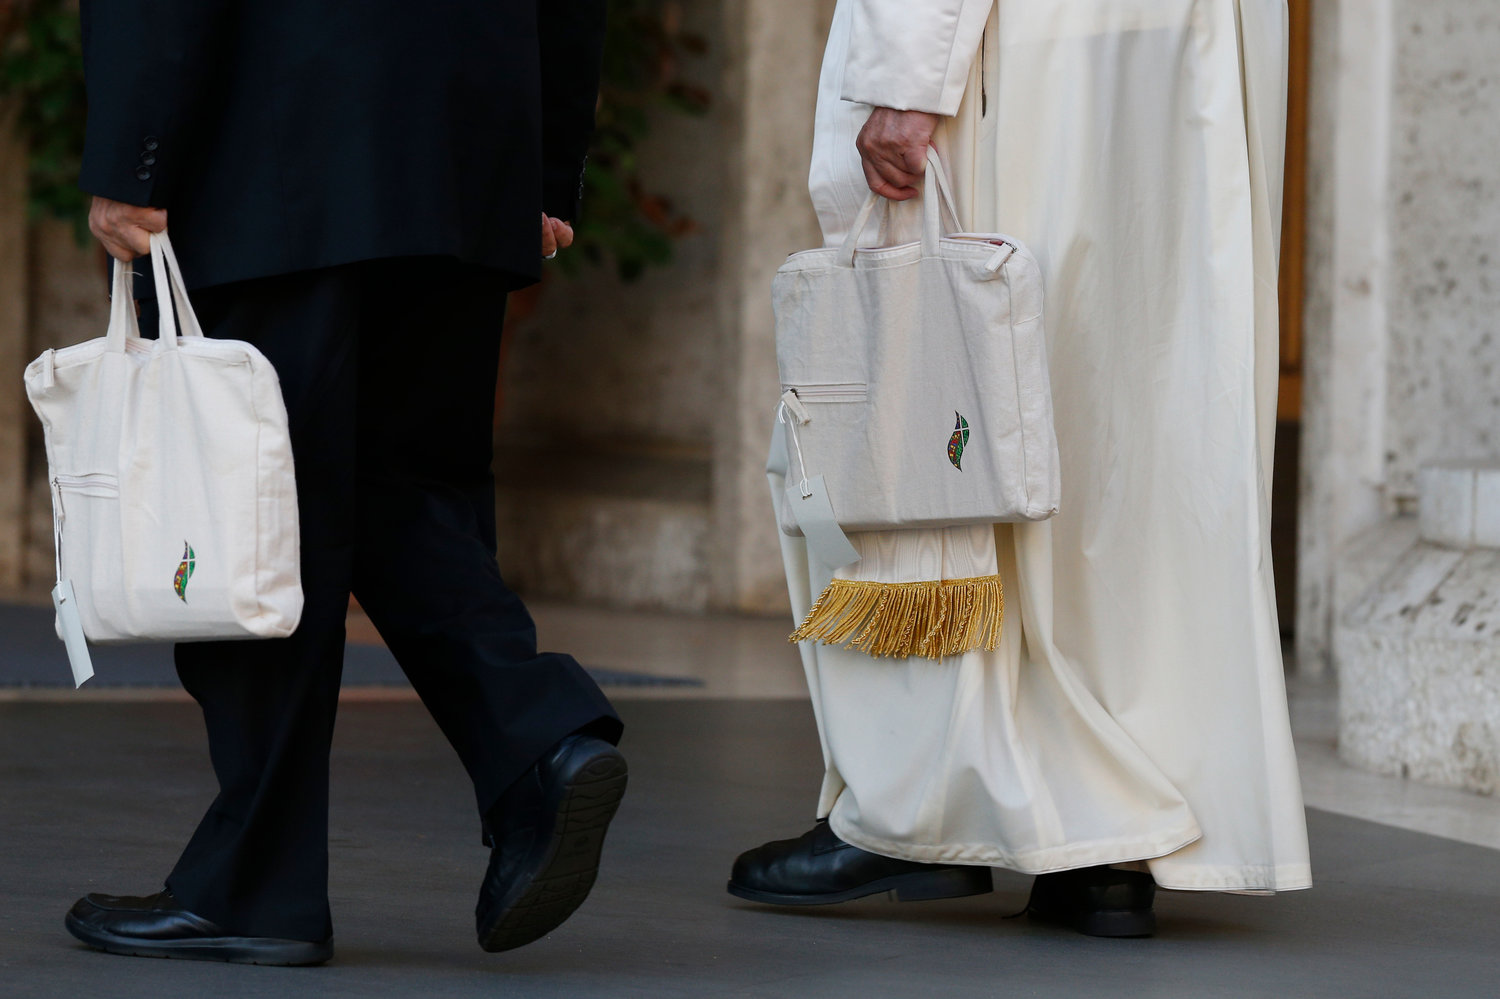 Pope Francis and Italian Bishop Marcello Semeraro of Albano carry their bags as they arrive for a session of the Synod of Bishops for the Amazon at the Vatican Oct. 15, 2019.